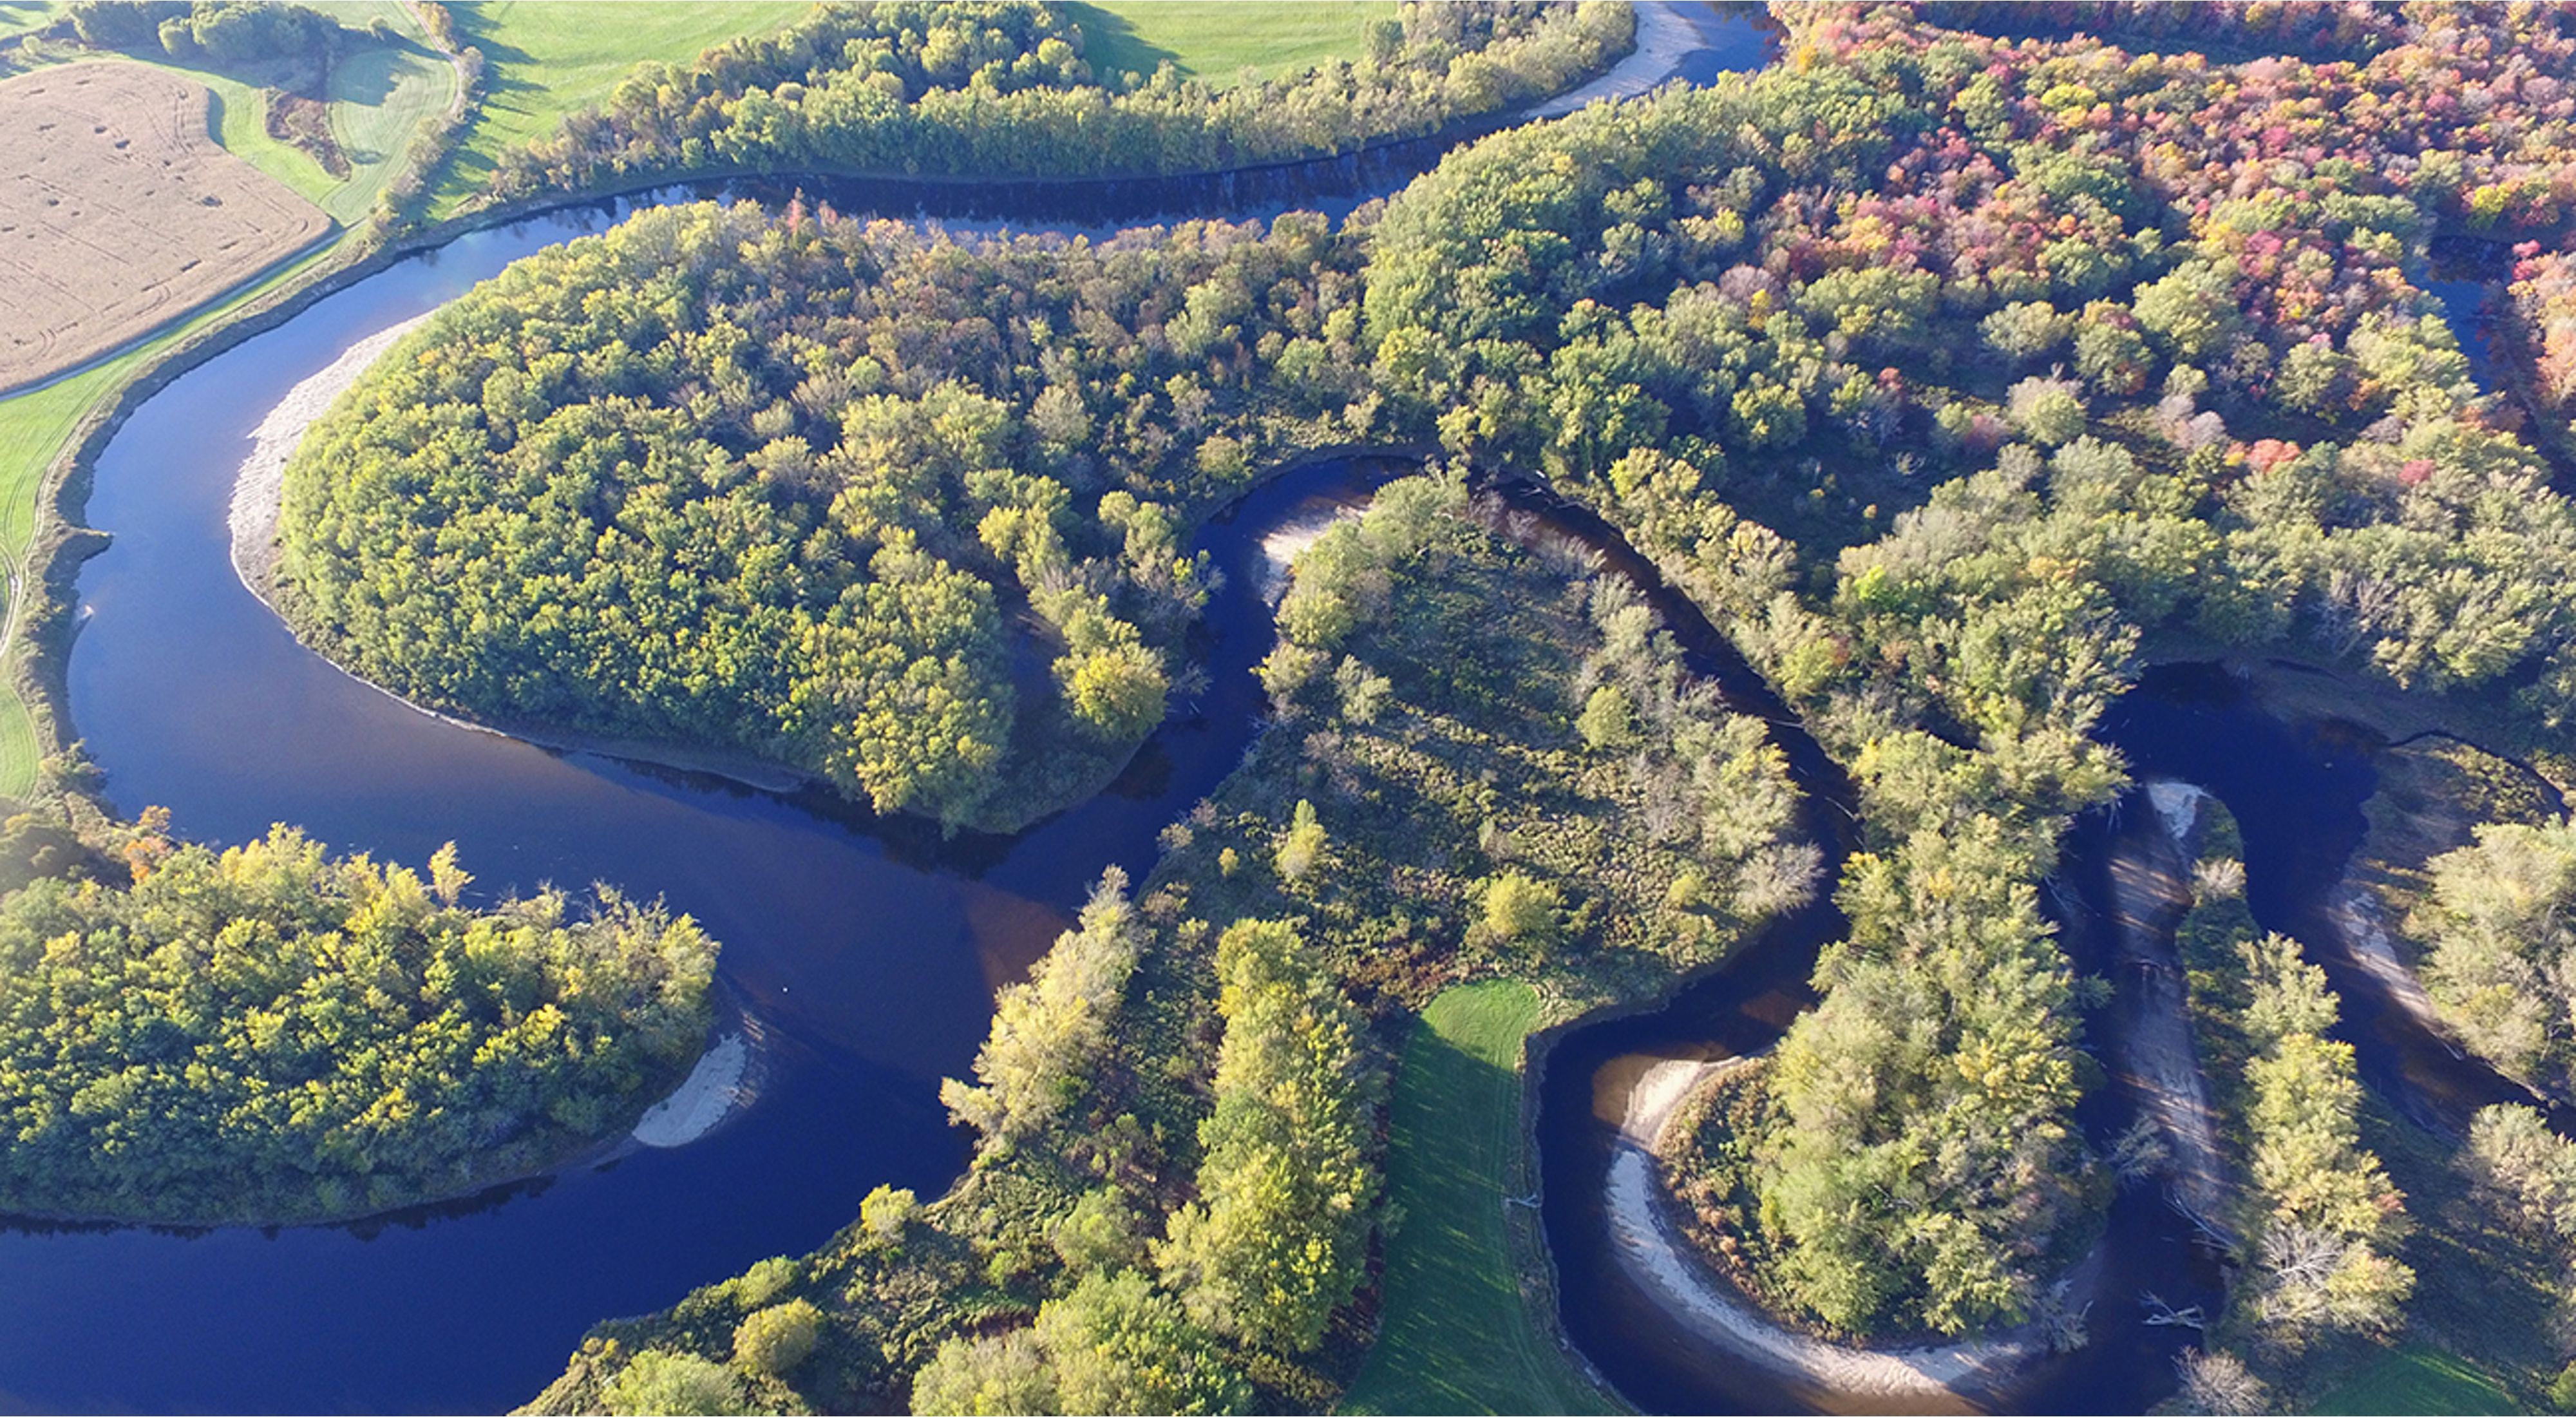 An aerial view of a river winding through a forested landscape.